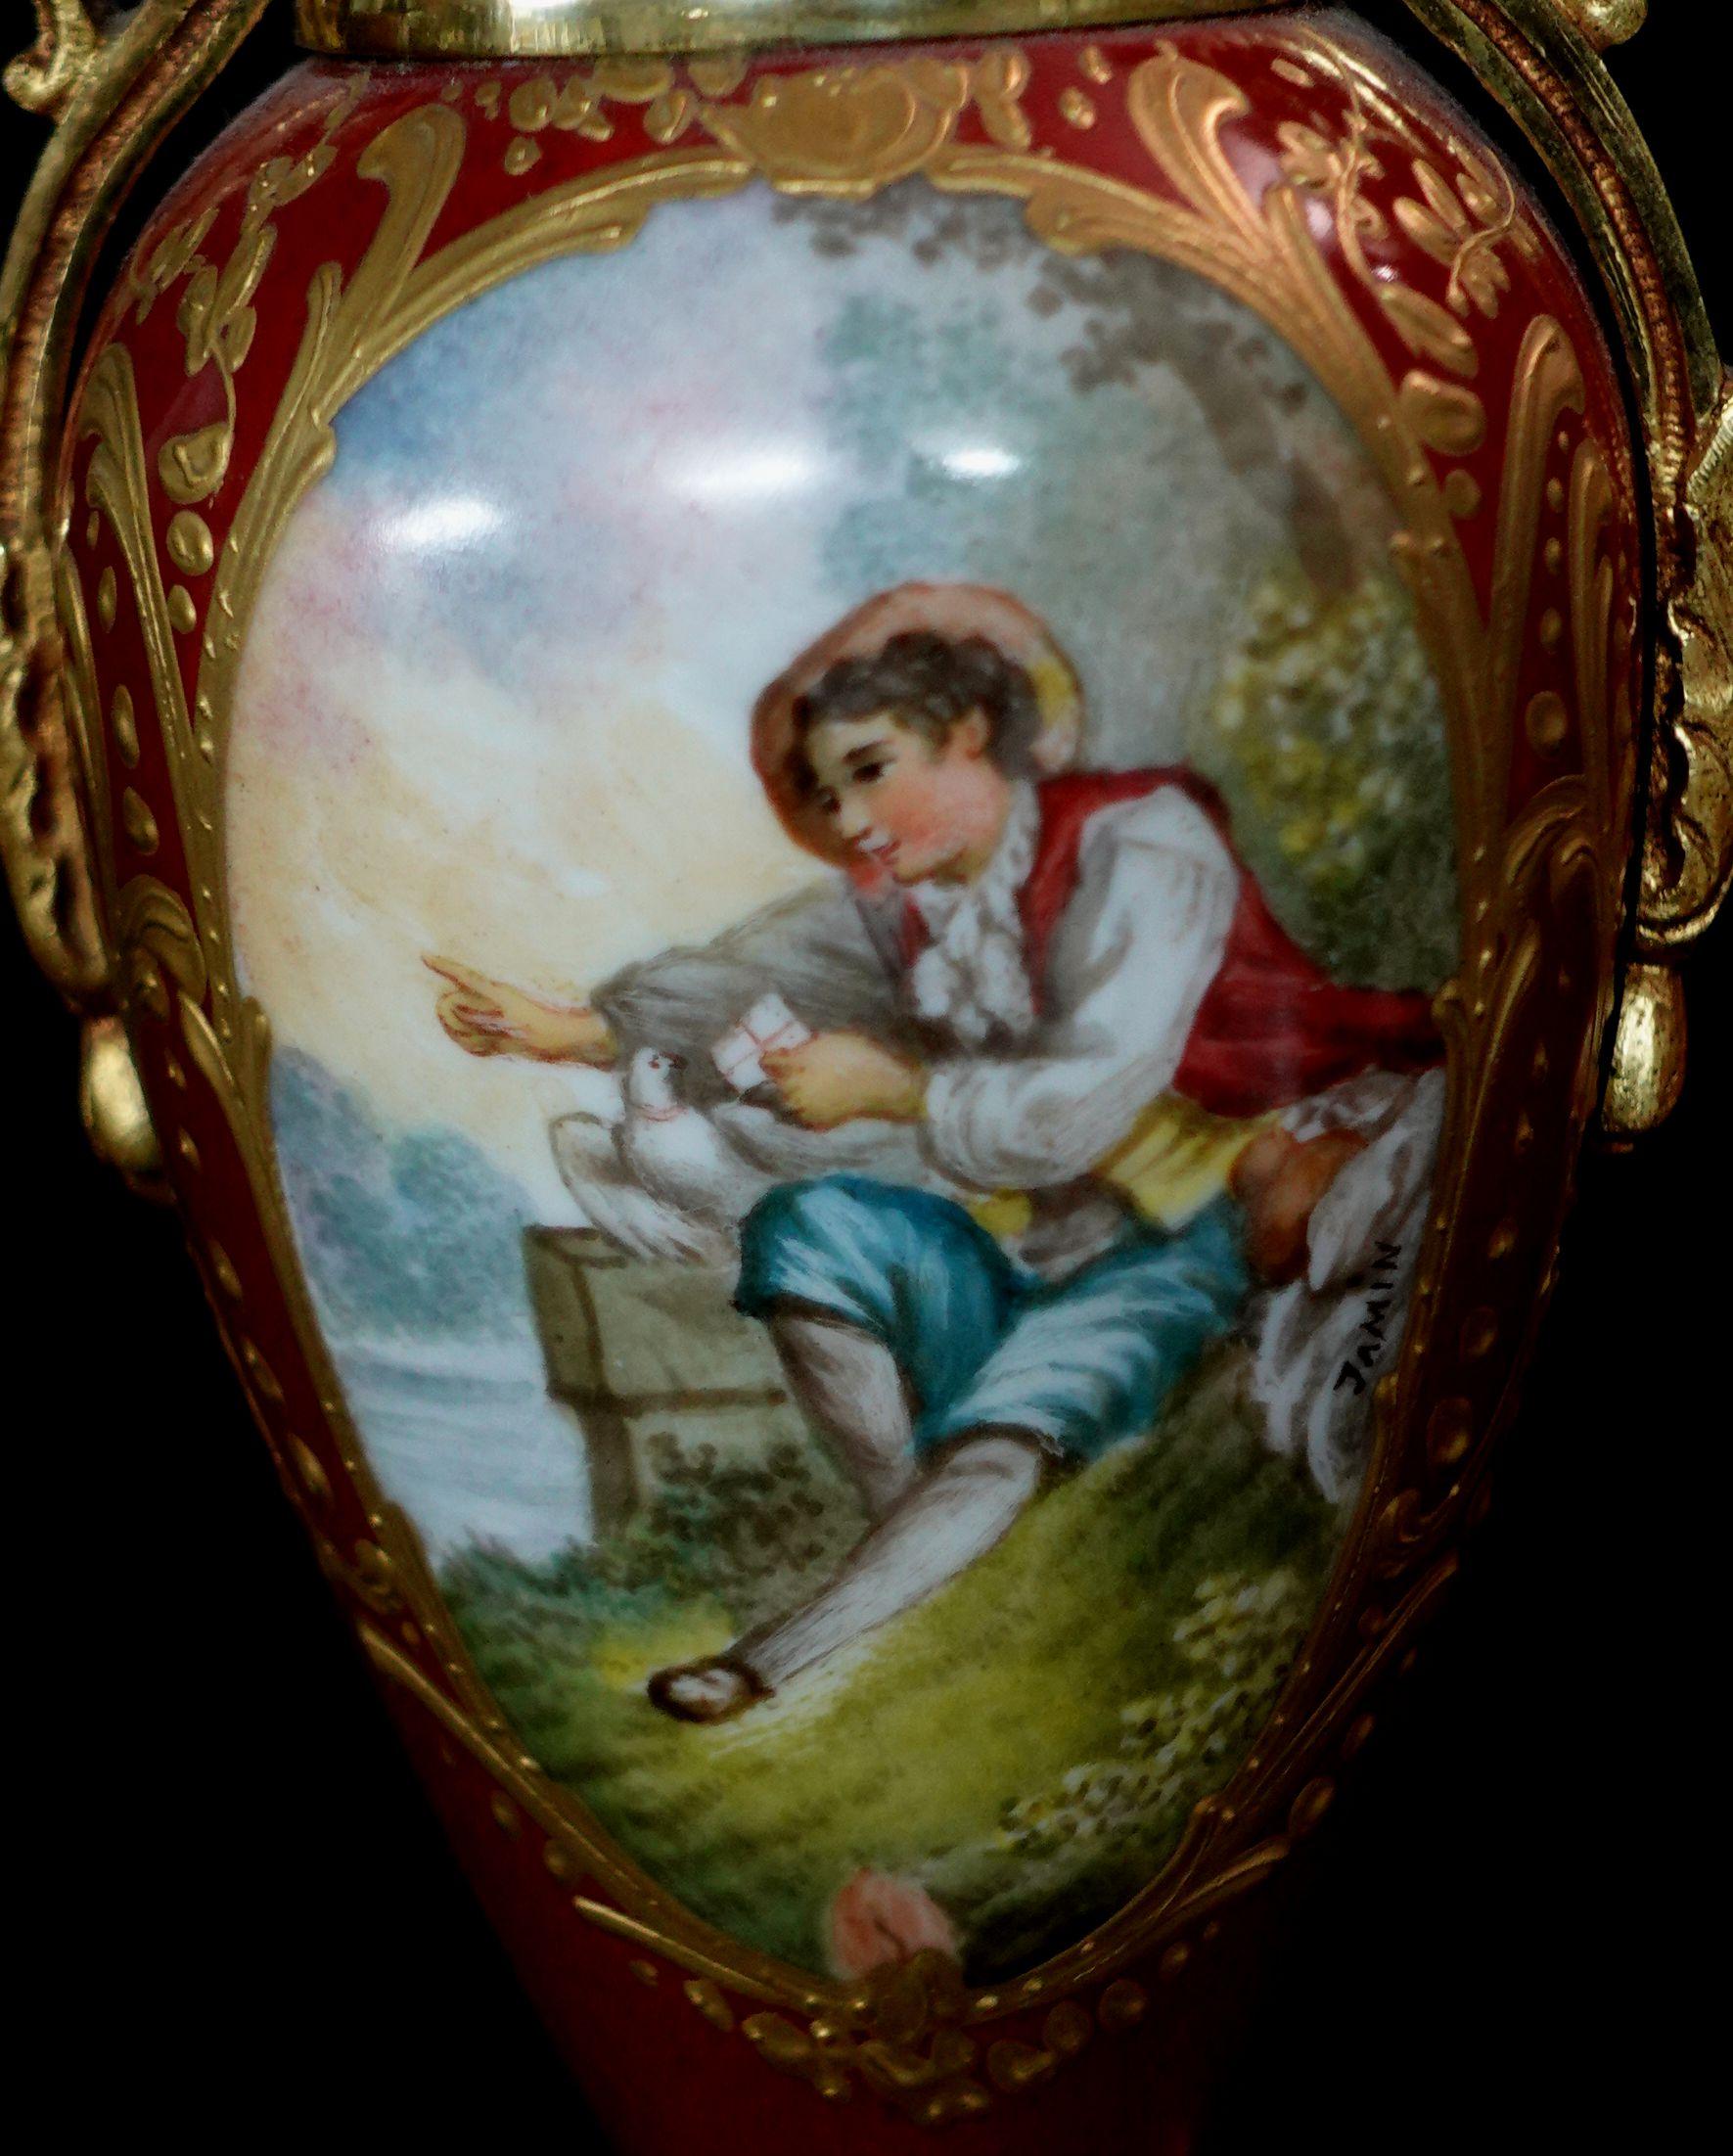 19th century french porcelain marks